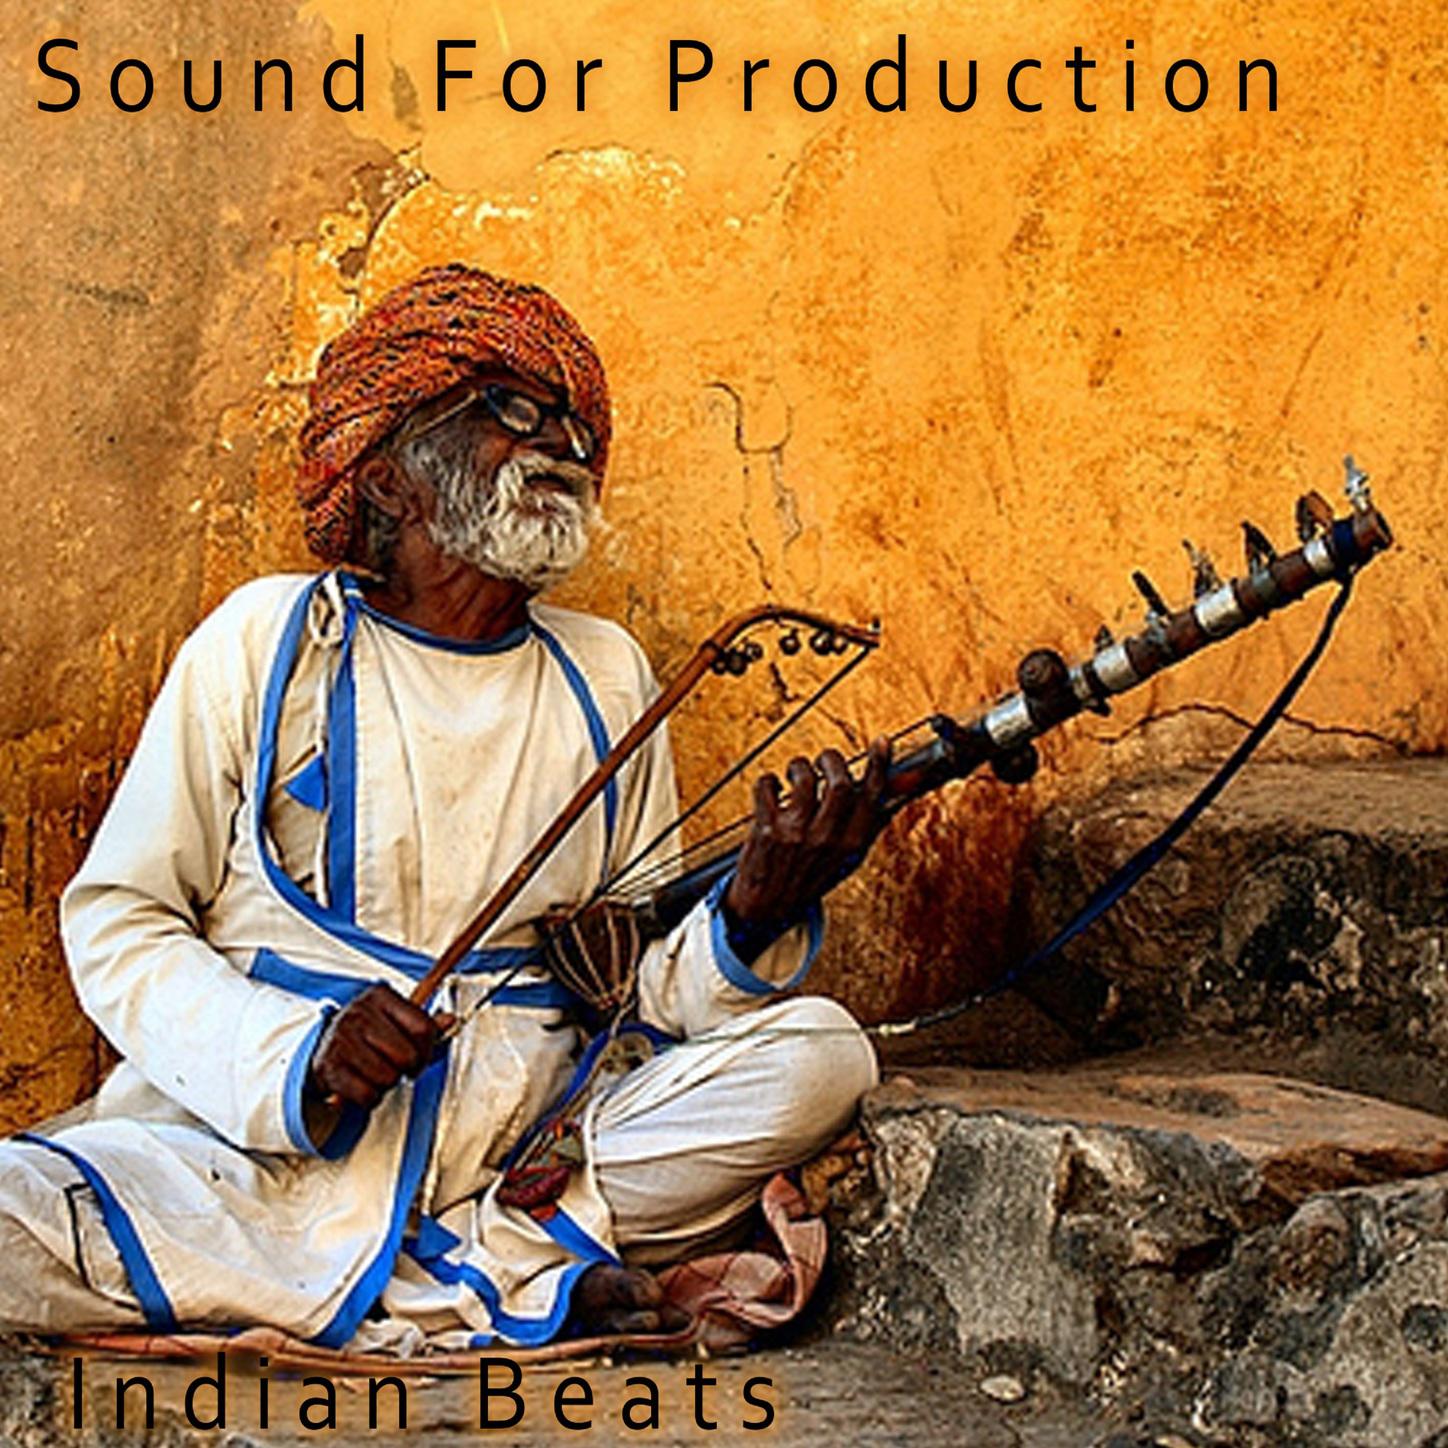 Sound For Production Indian Beats